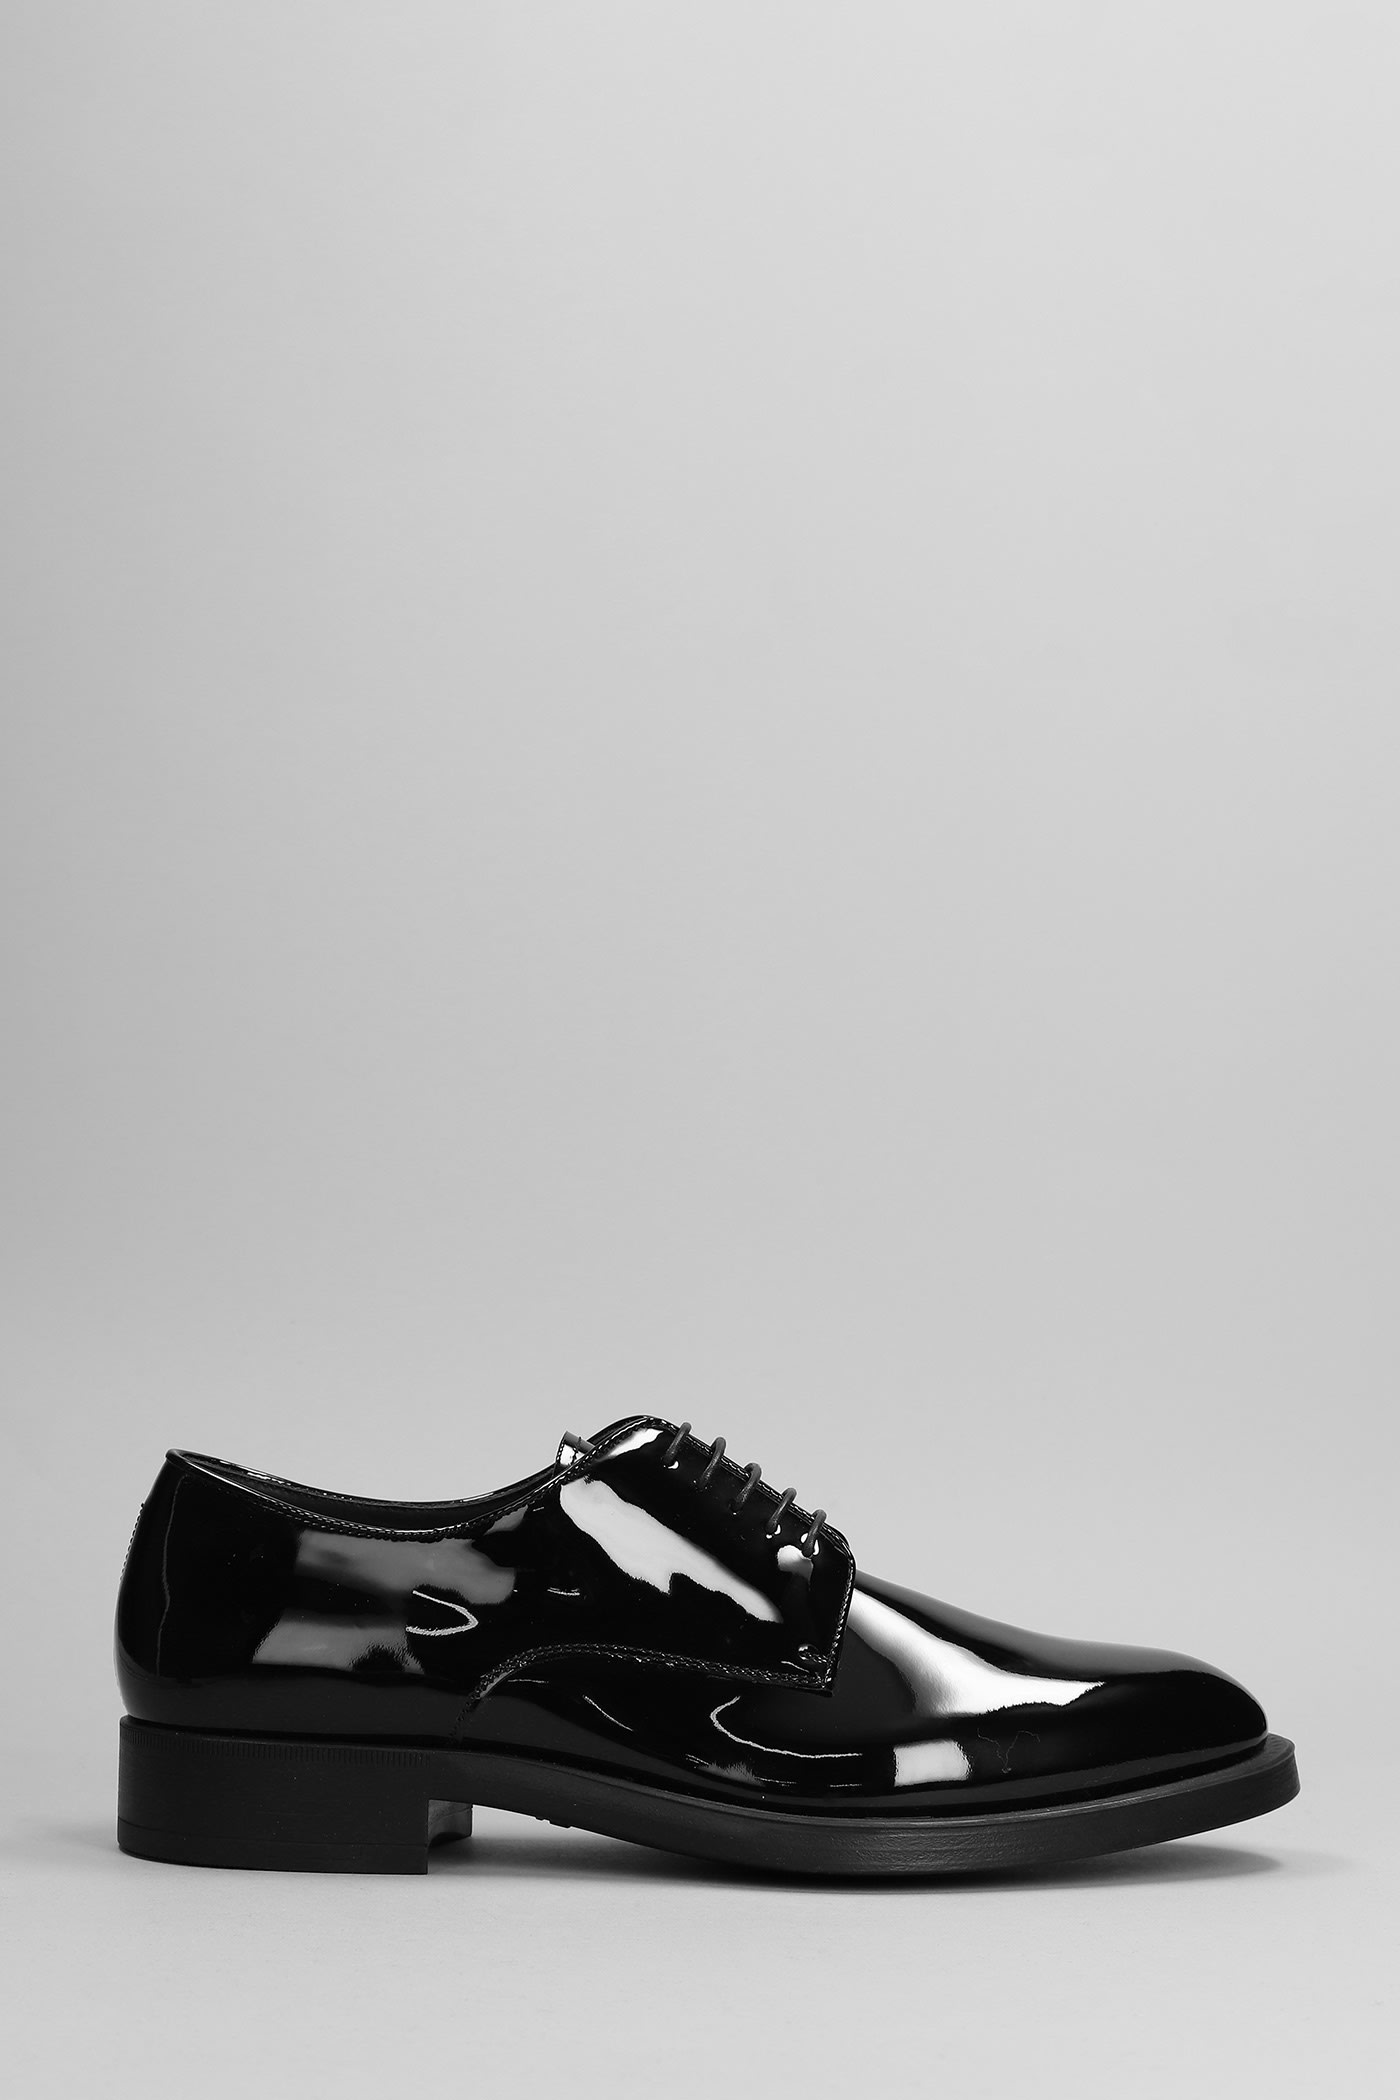 Giorgio Armani Lace Up Shoes In Black Patent Leather